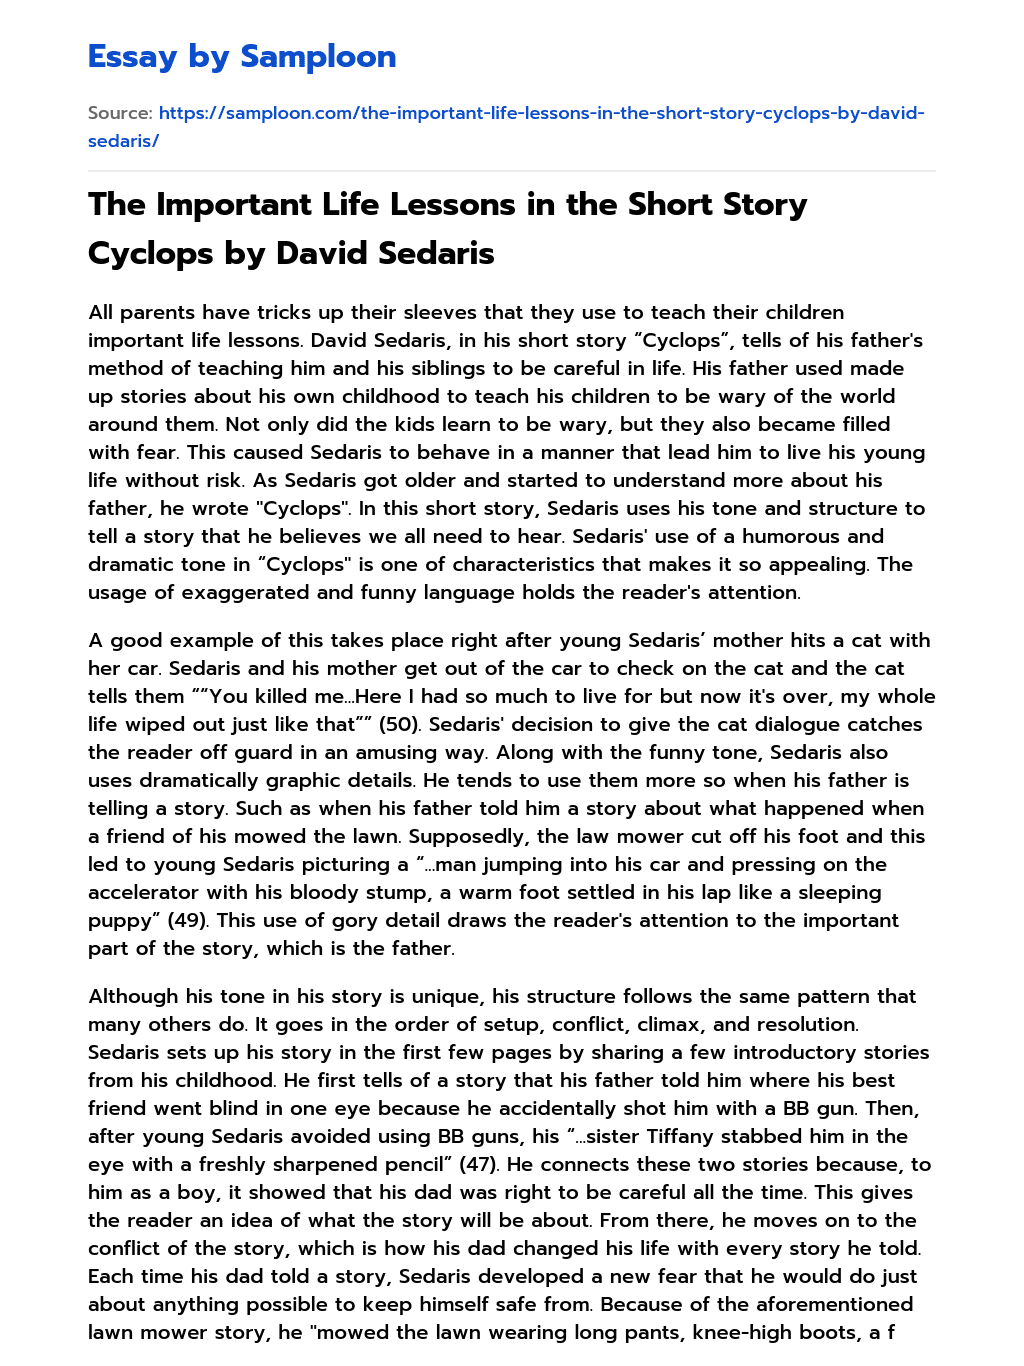 The Important Life Lessons in the Short Story Cyclops by David Sedaris essay